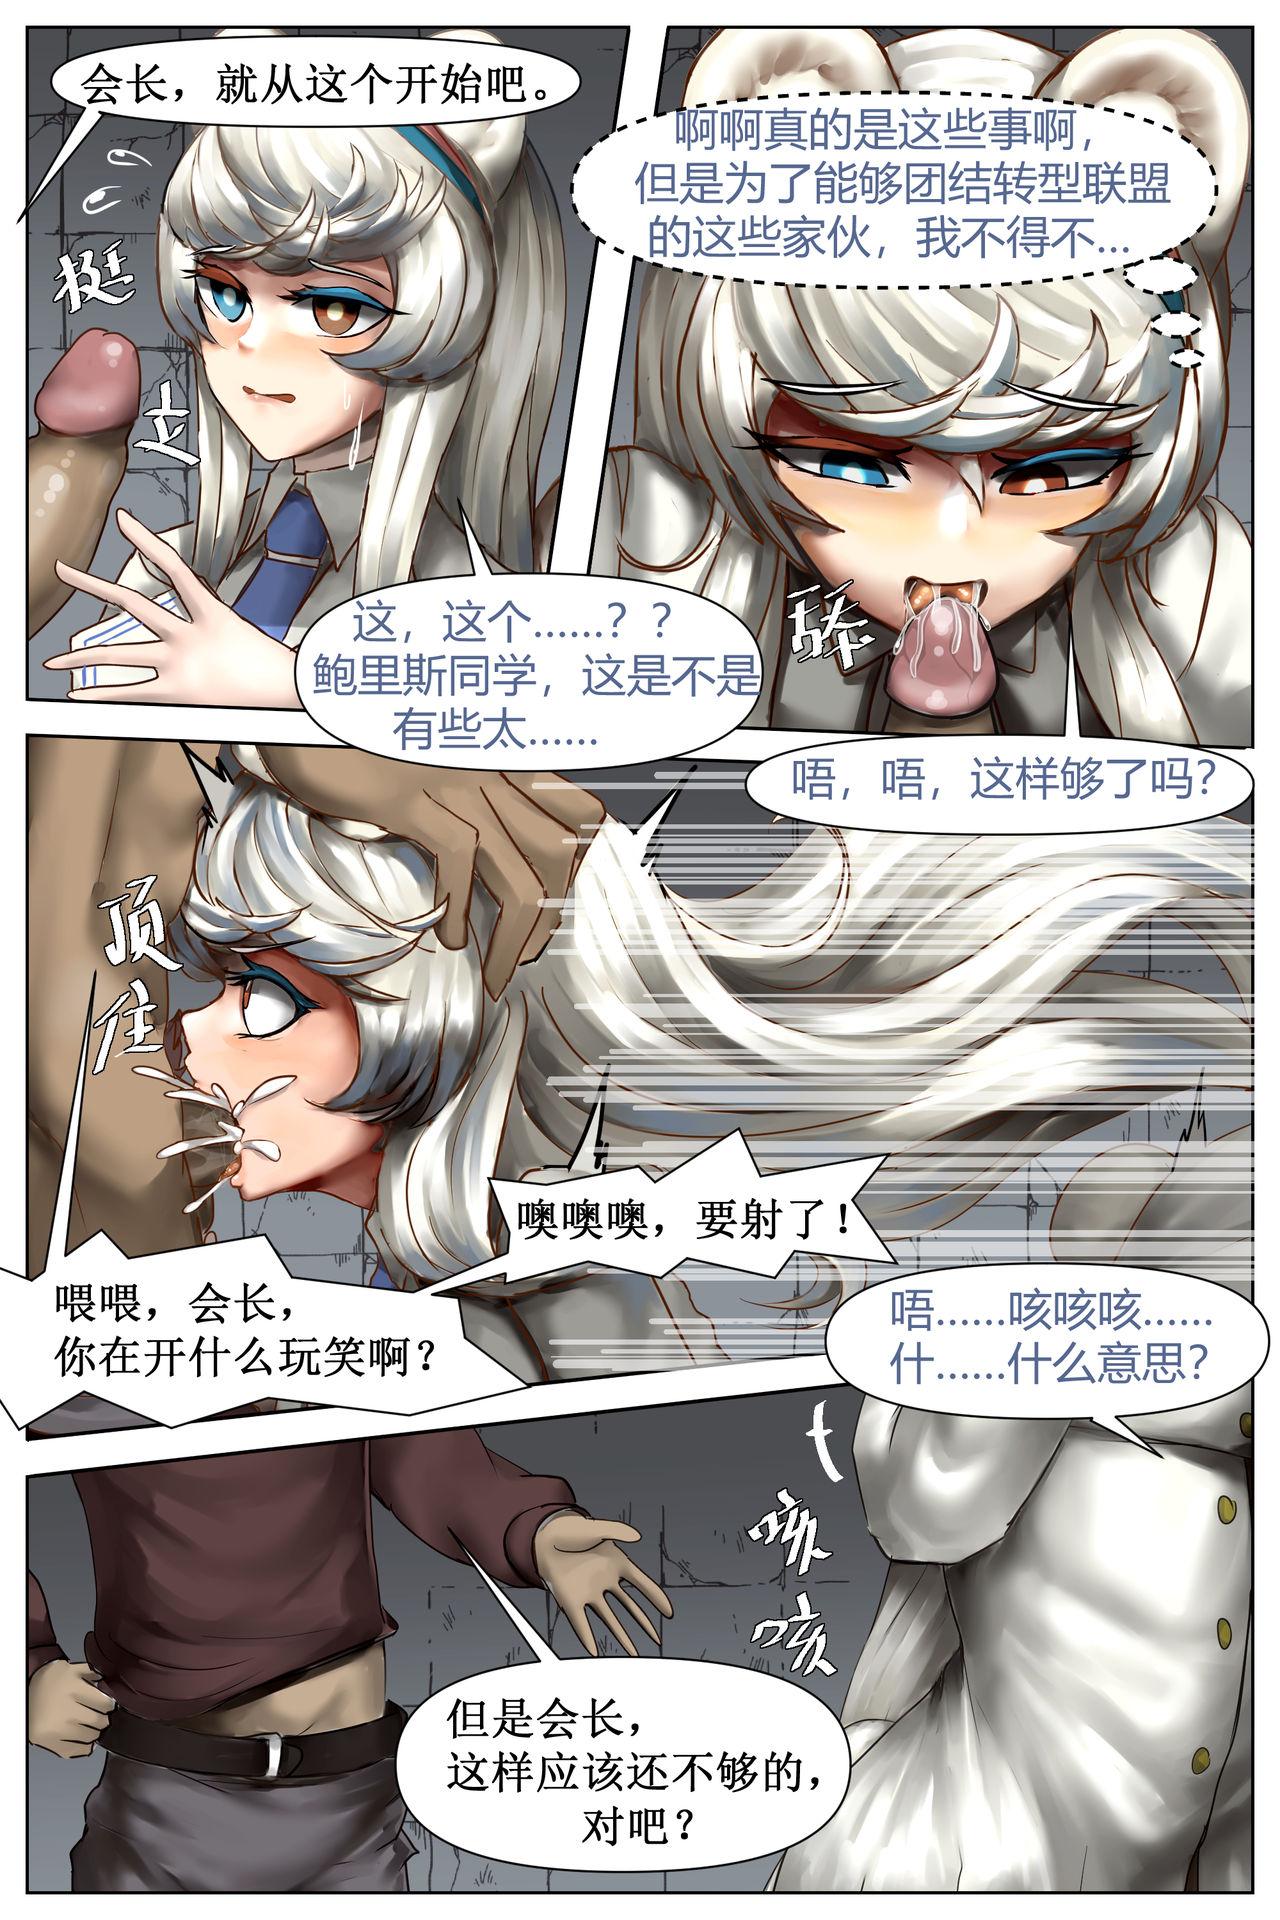 Pussy Fingering 理想者的末路 - Arknights Group Sex - Page 5